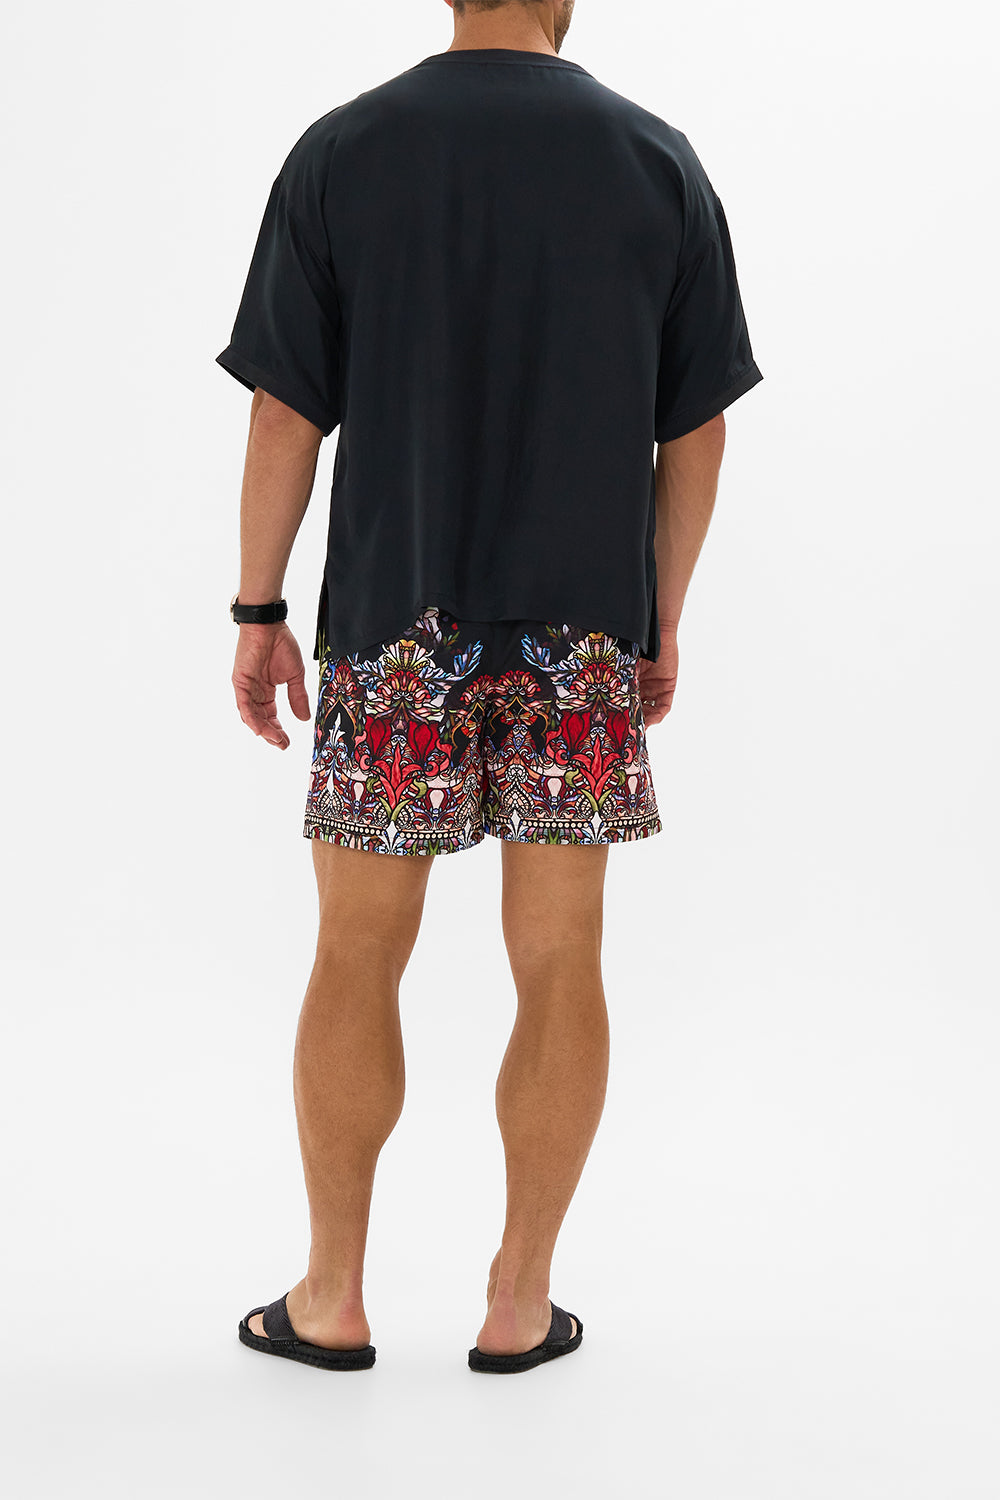 Hotel Franks by CAMILLA floral mid length boardshort in Leadlight Legends